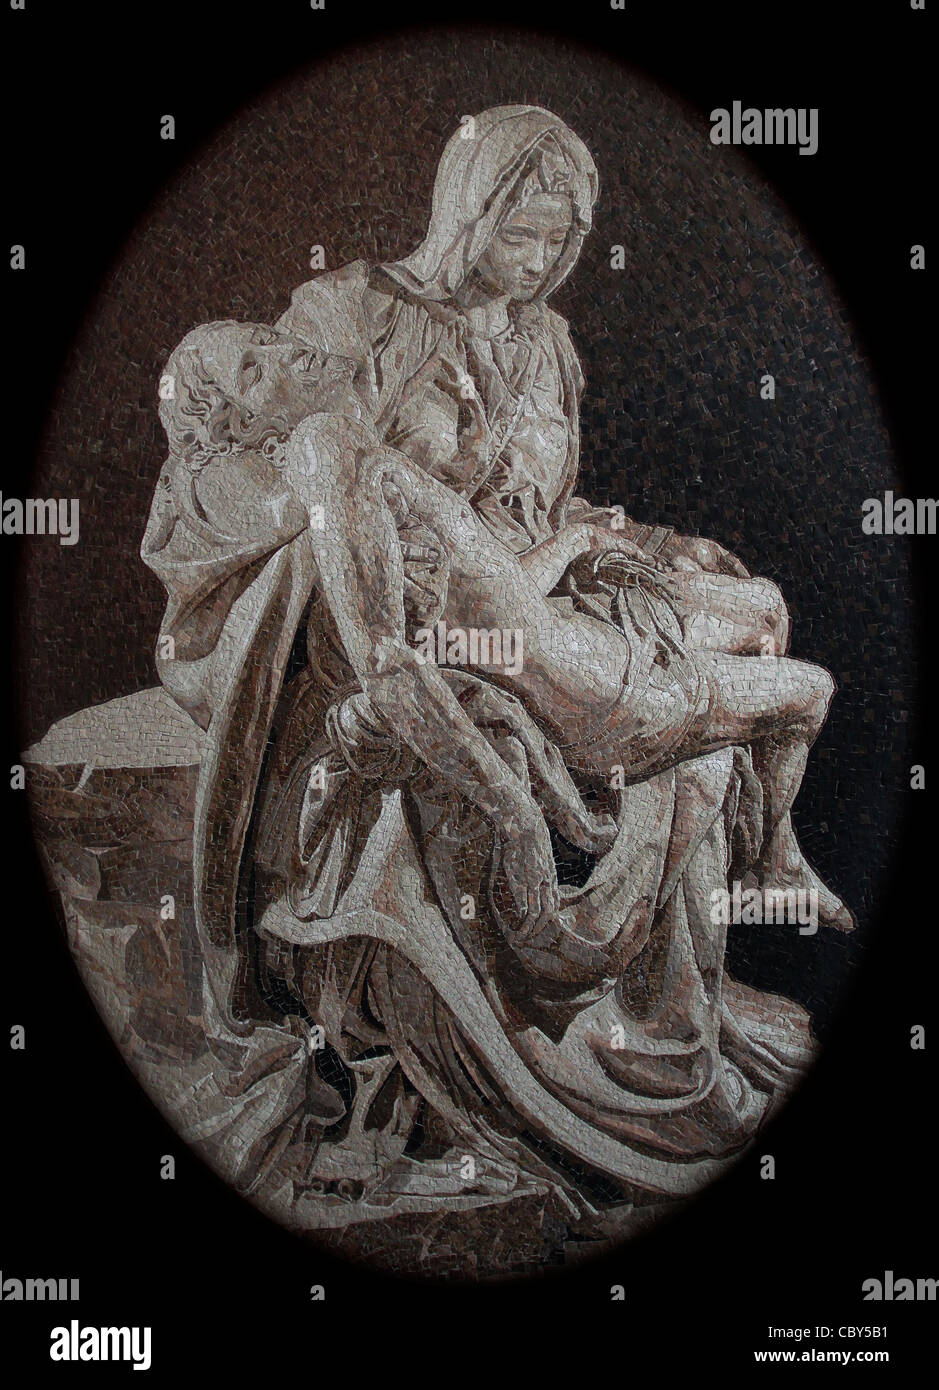 Interpretation in mosaic of the Pietà sculptured by Michelangelo, housed in St. Peter's Basilica in Vatican City, Italy. Stock Photo